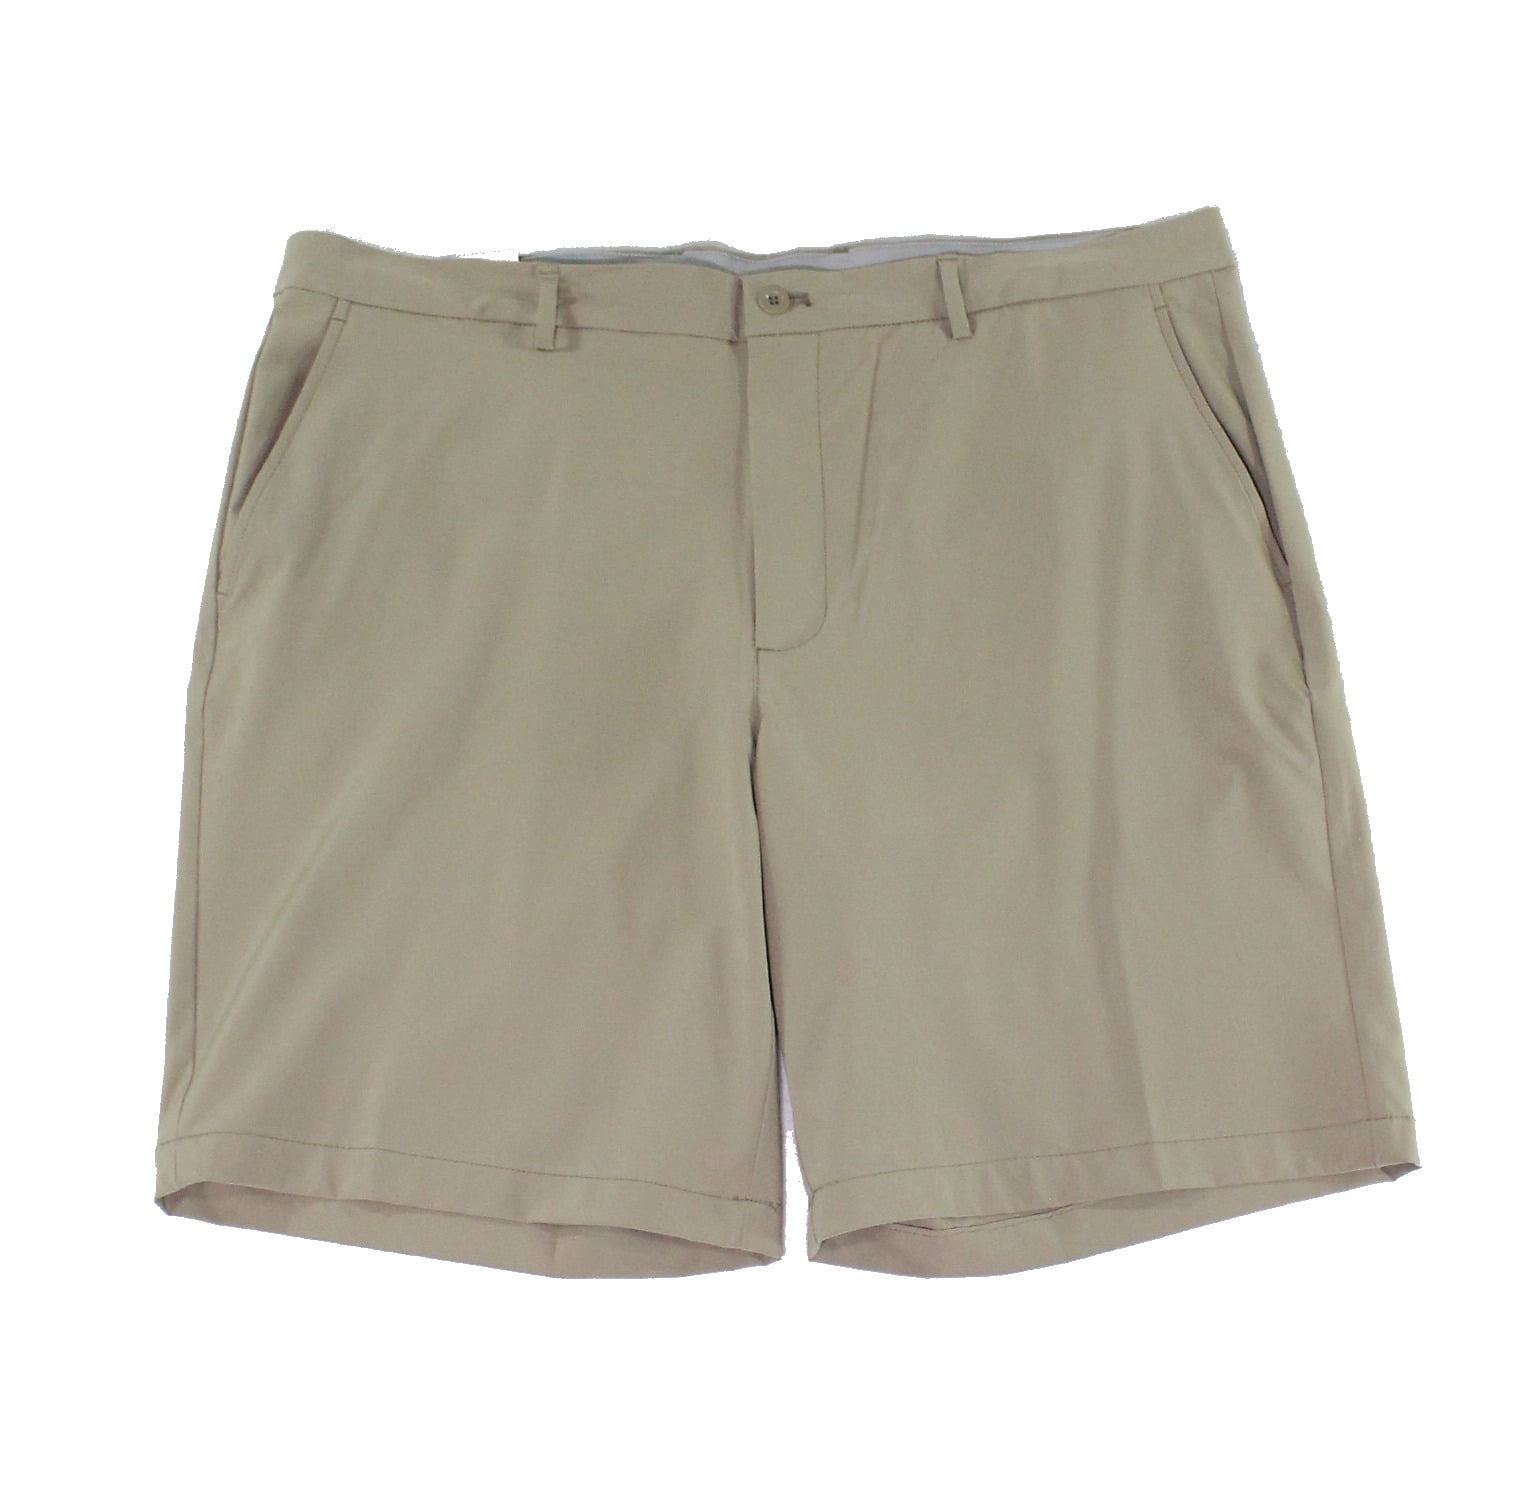 Attack Life by Greg Norman Mens Fuego Workout Fitness Shorts Athletic BHFO 2960